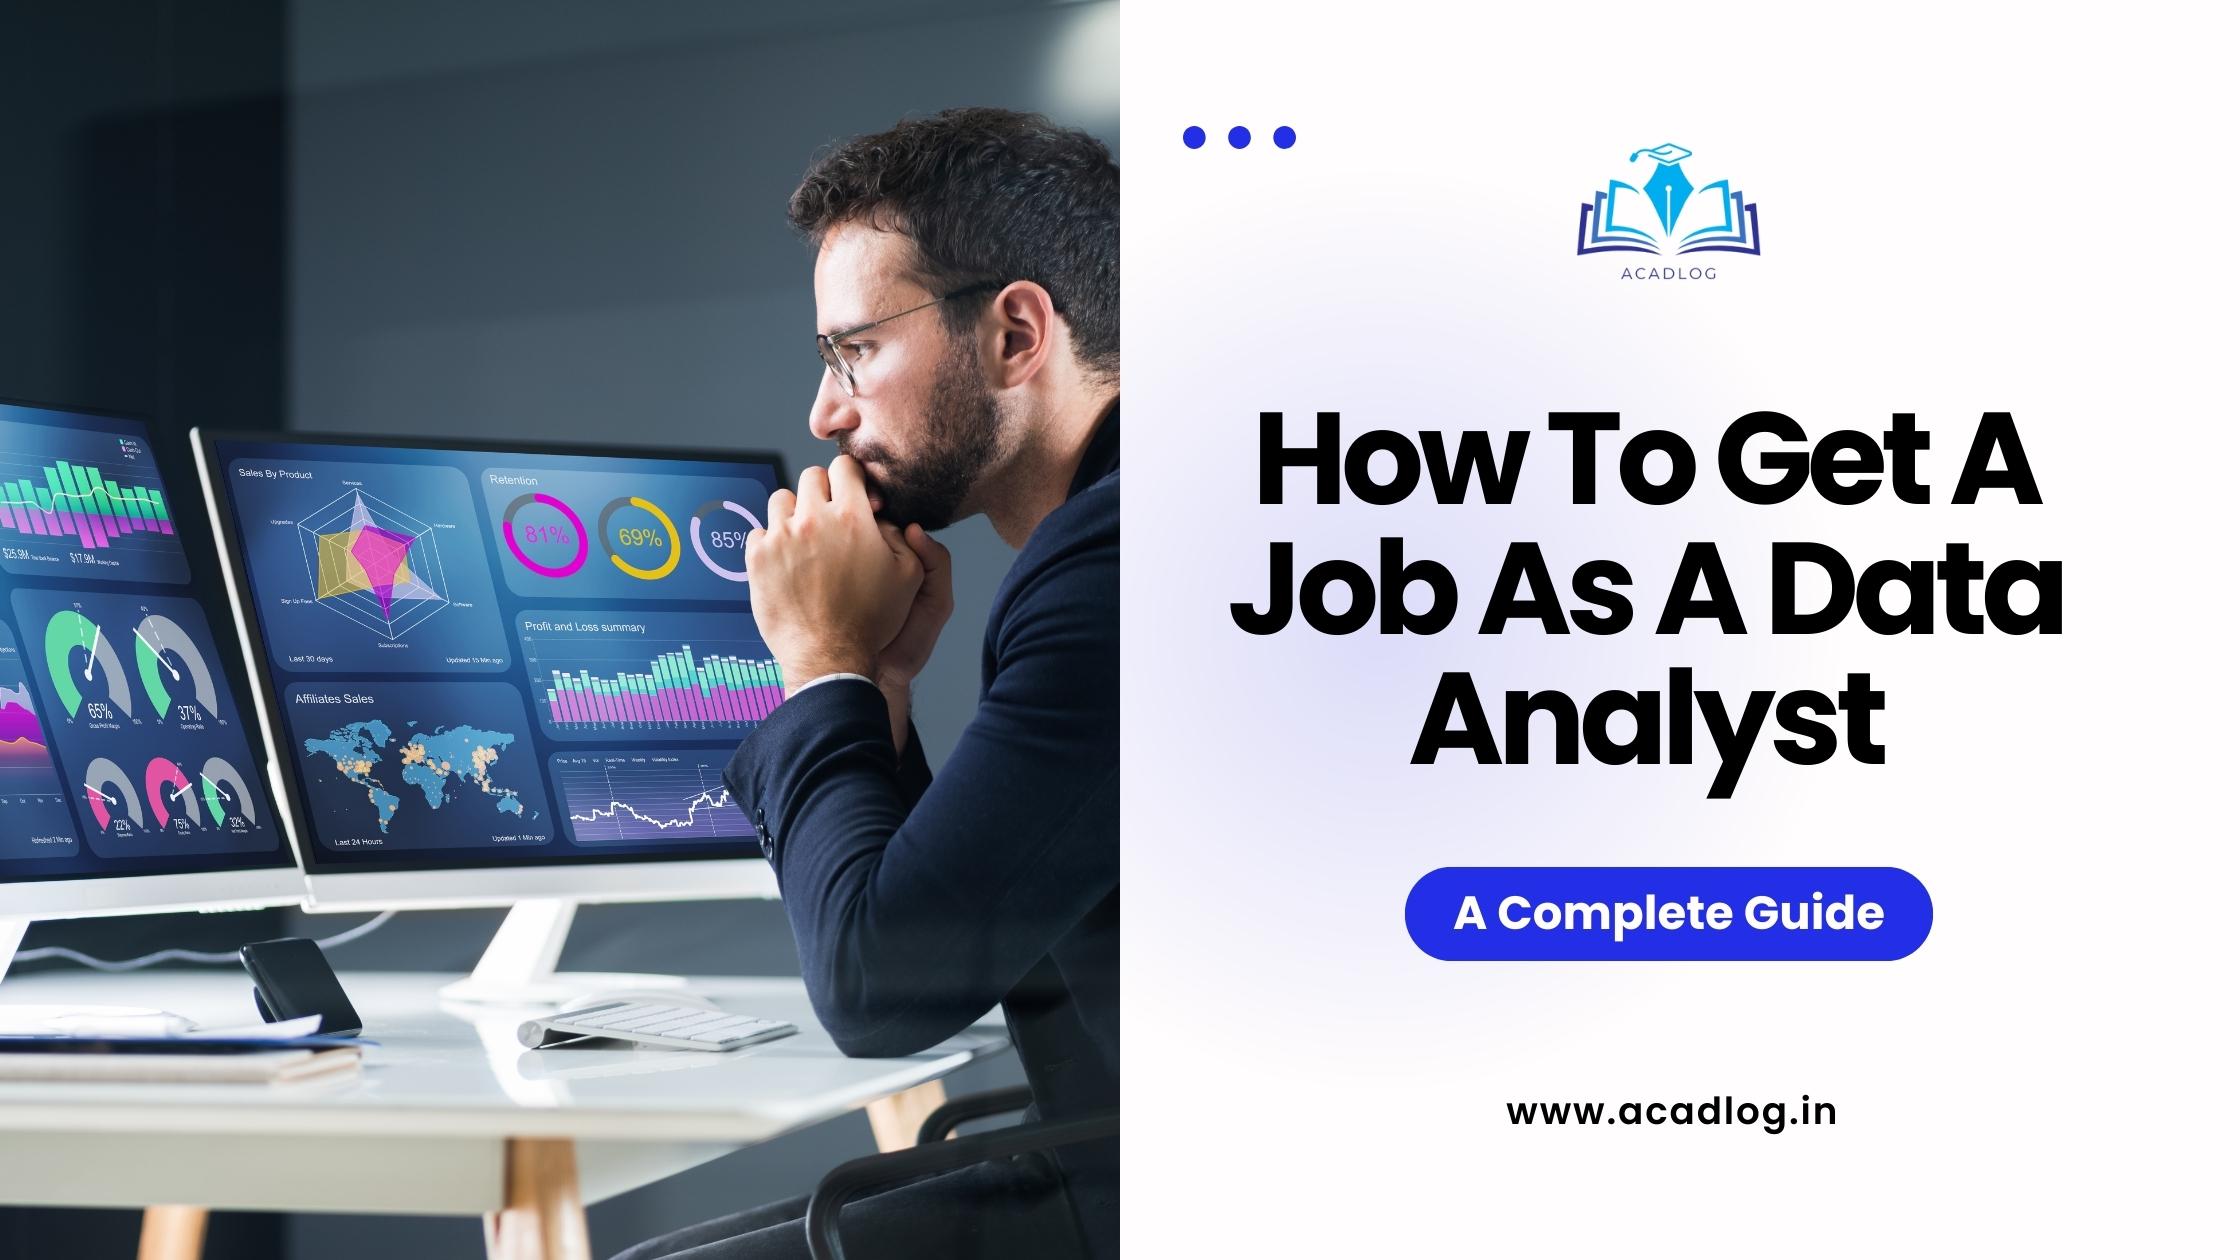 How To Get A Job As A Data Analyst